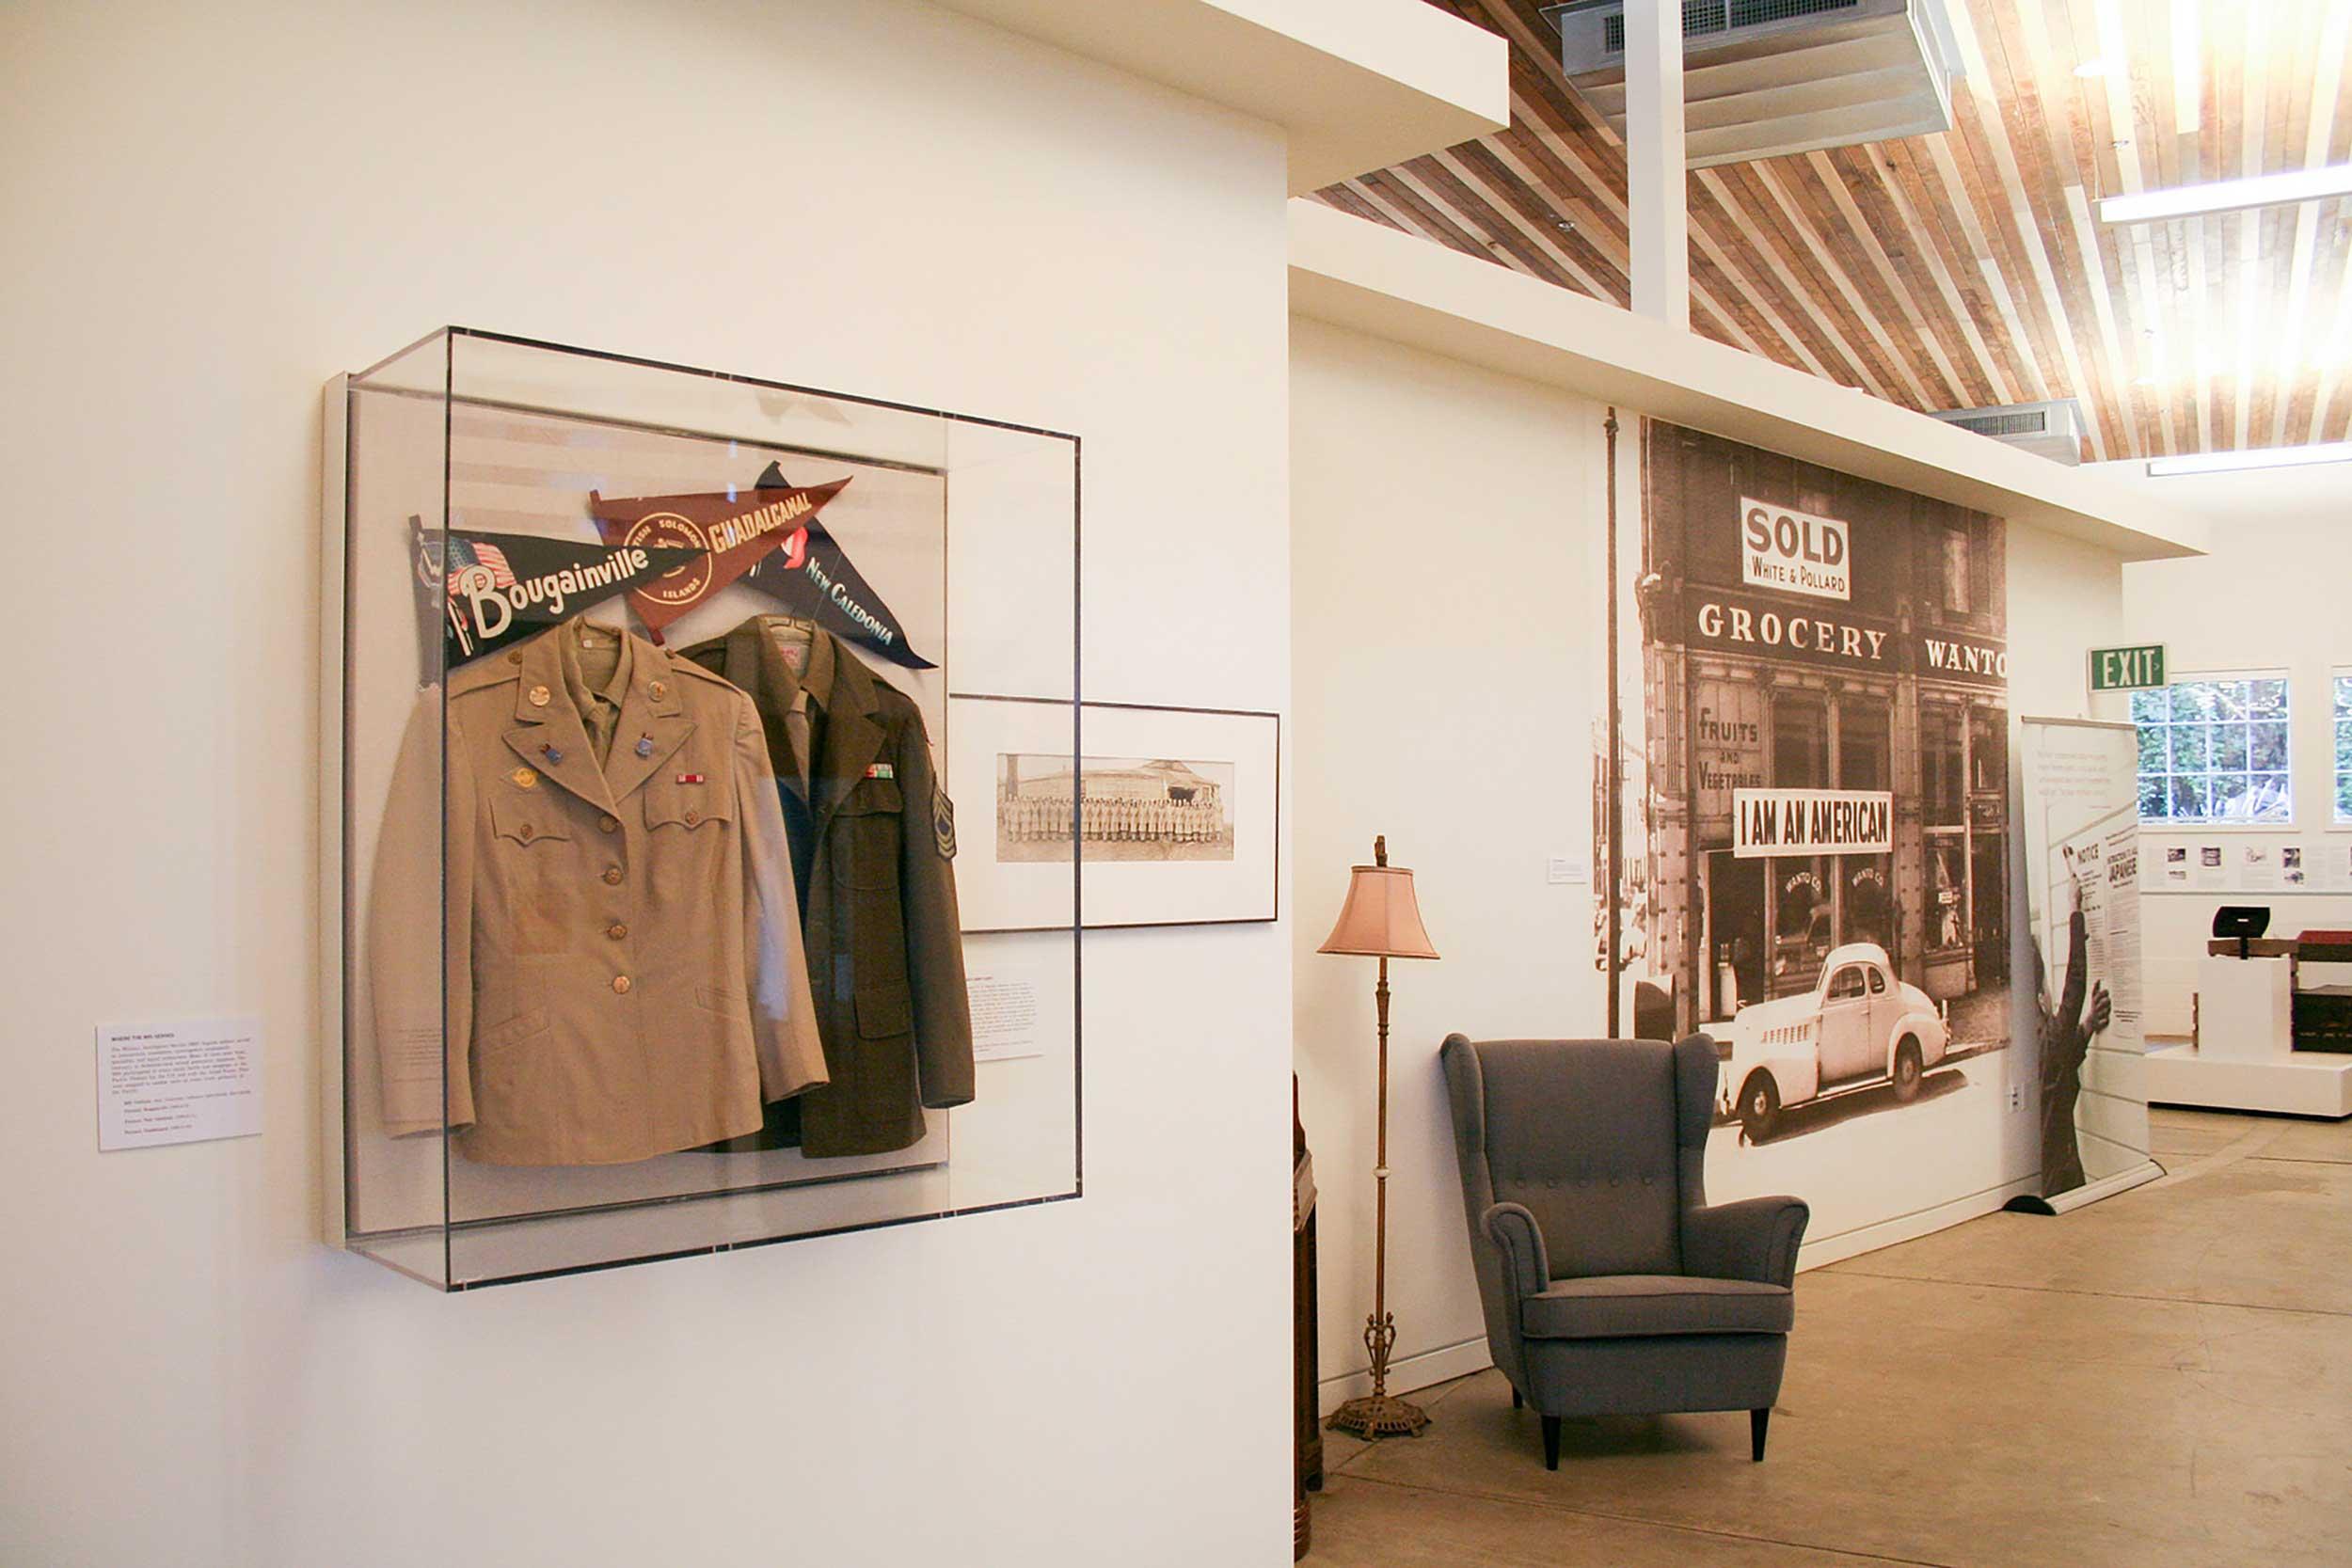 Exhibits inside the MIS Historic Learning Center in the Presidio. Photo courtesy of the National Japanese American Historical Society